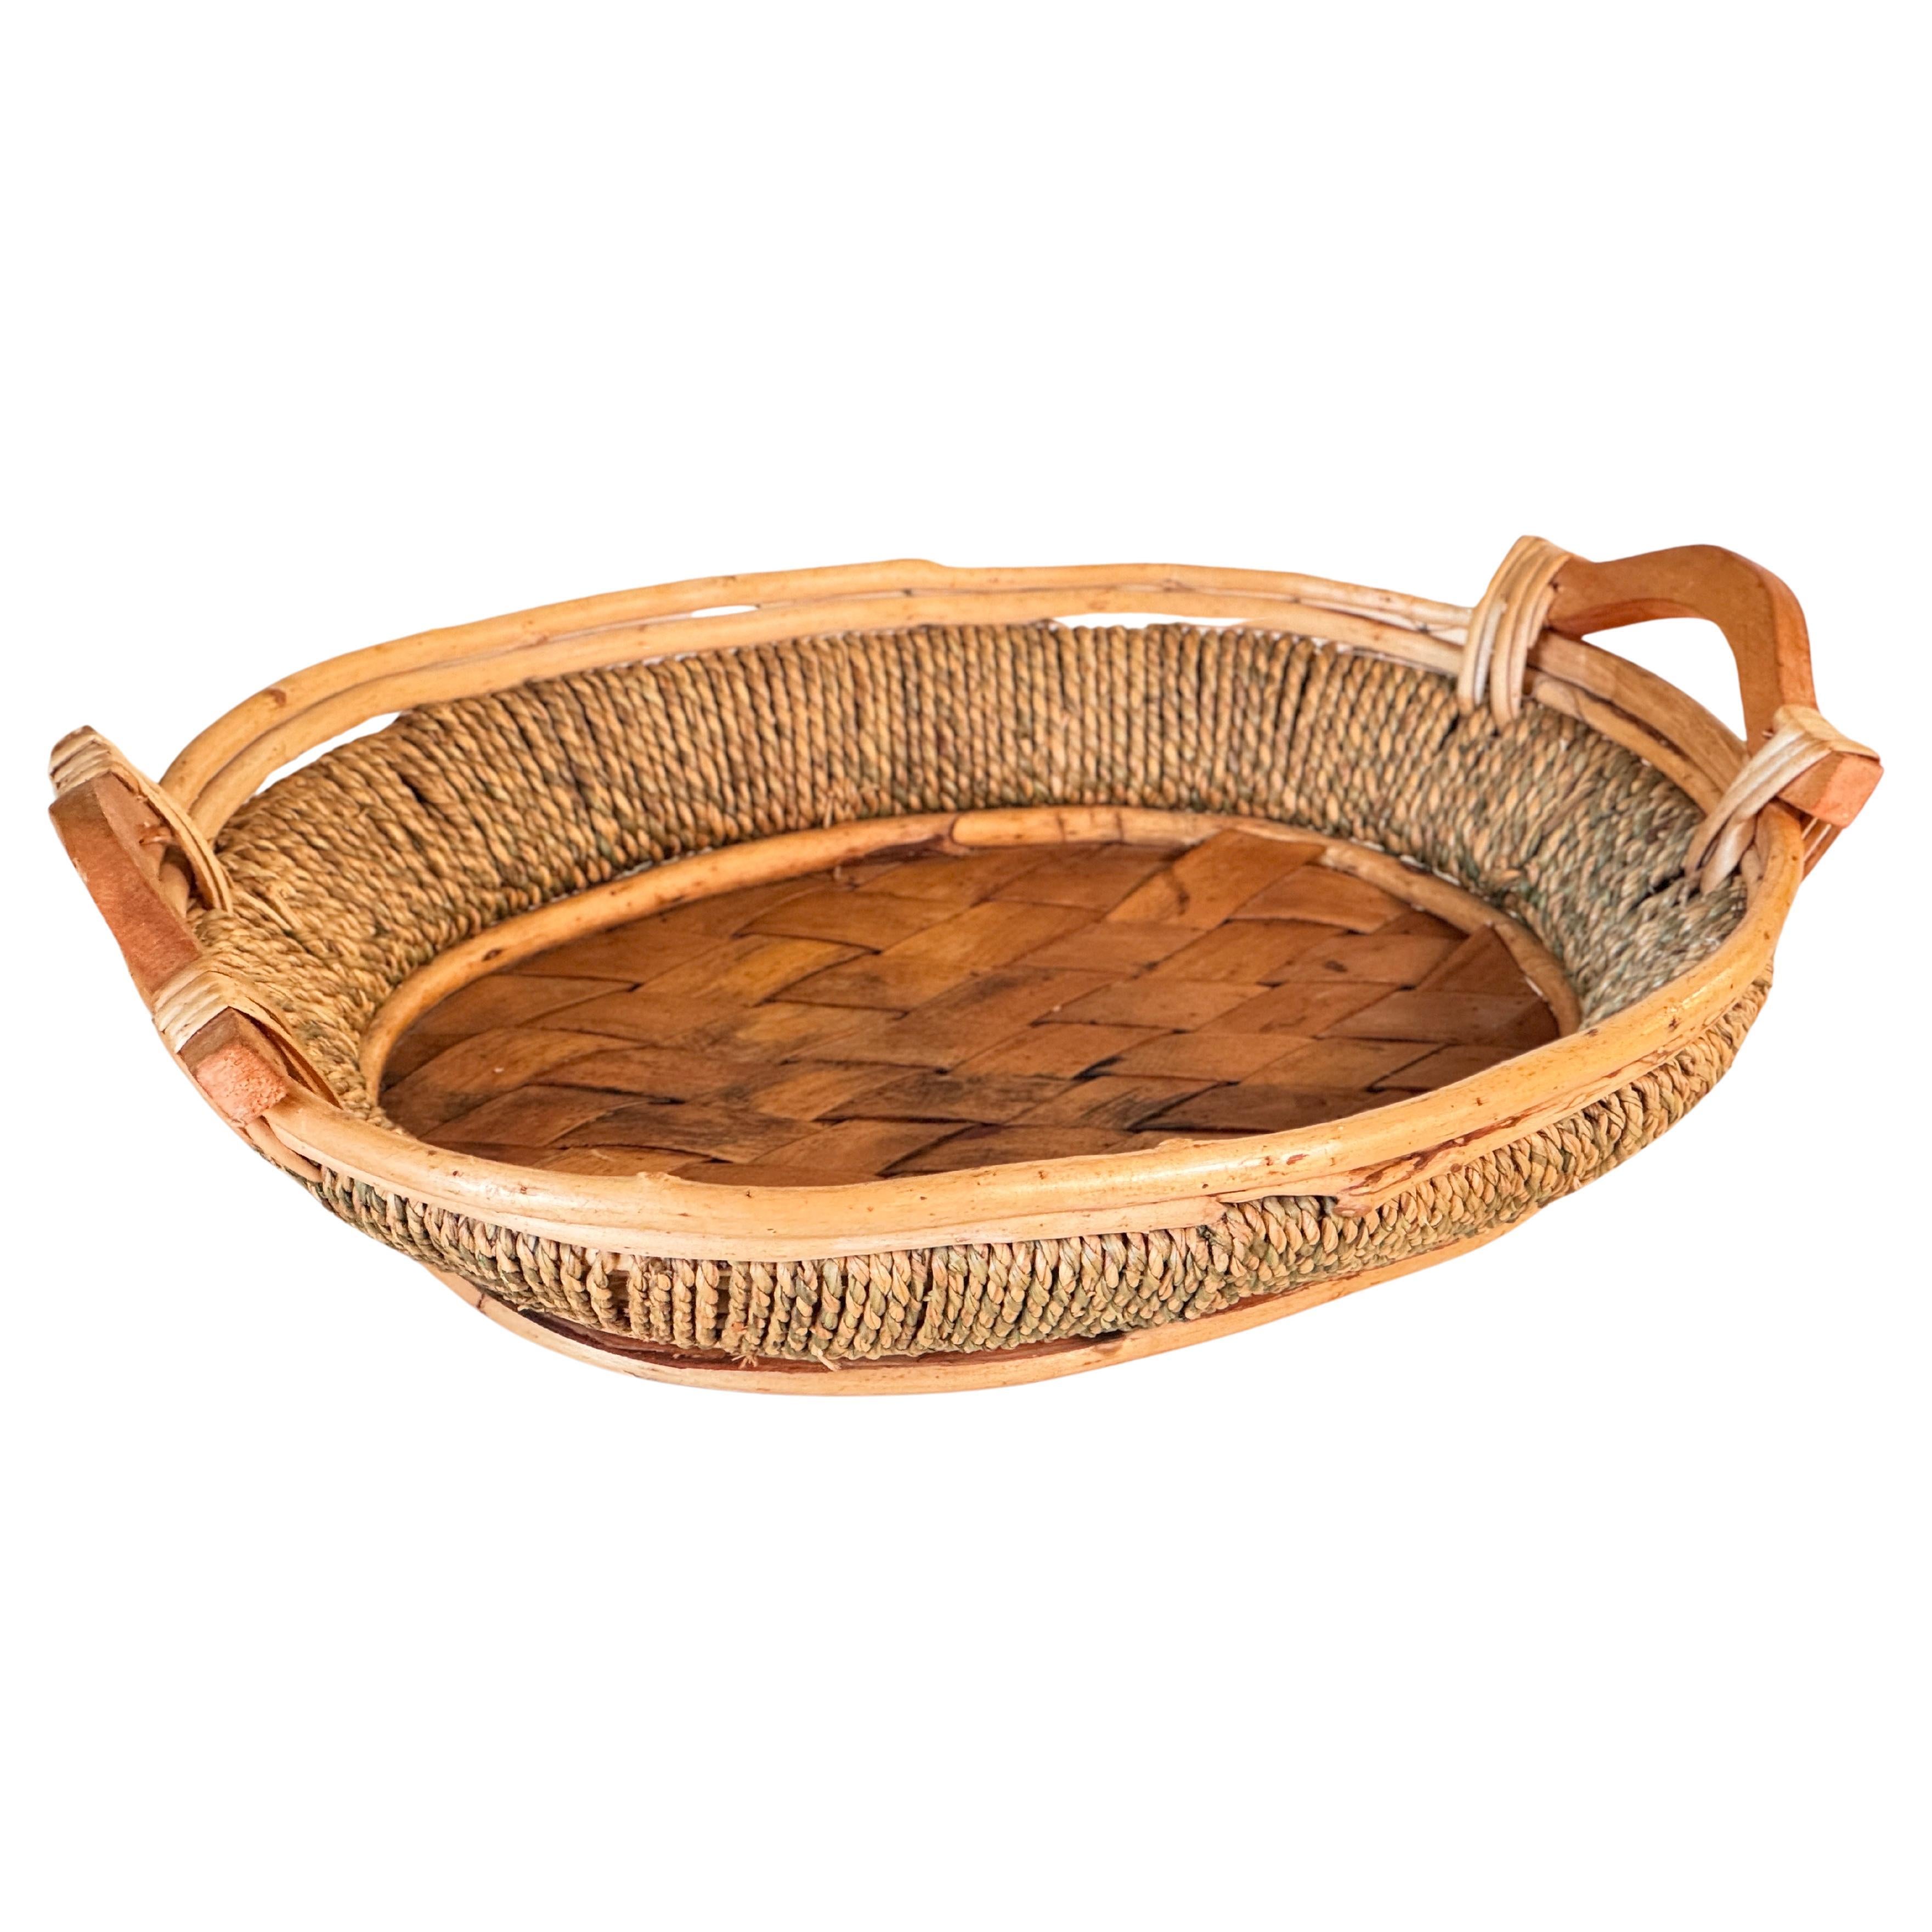 Rattan and Rope Italian Basket Bowl Centerpiece, 1970s Crespi Style For Sale